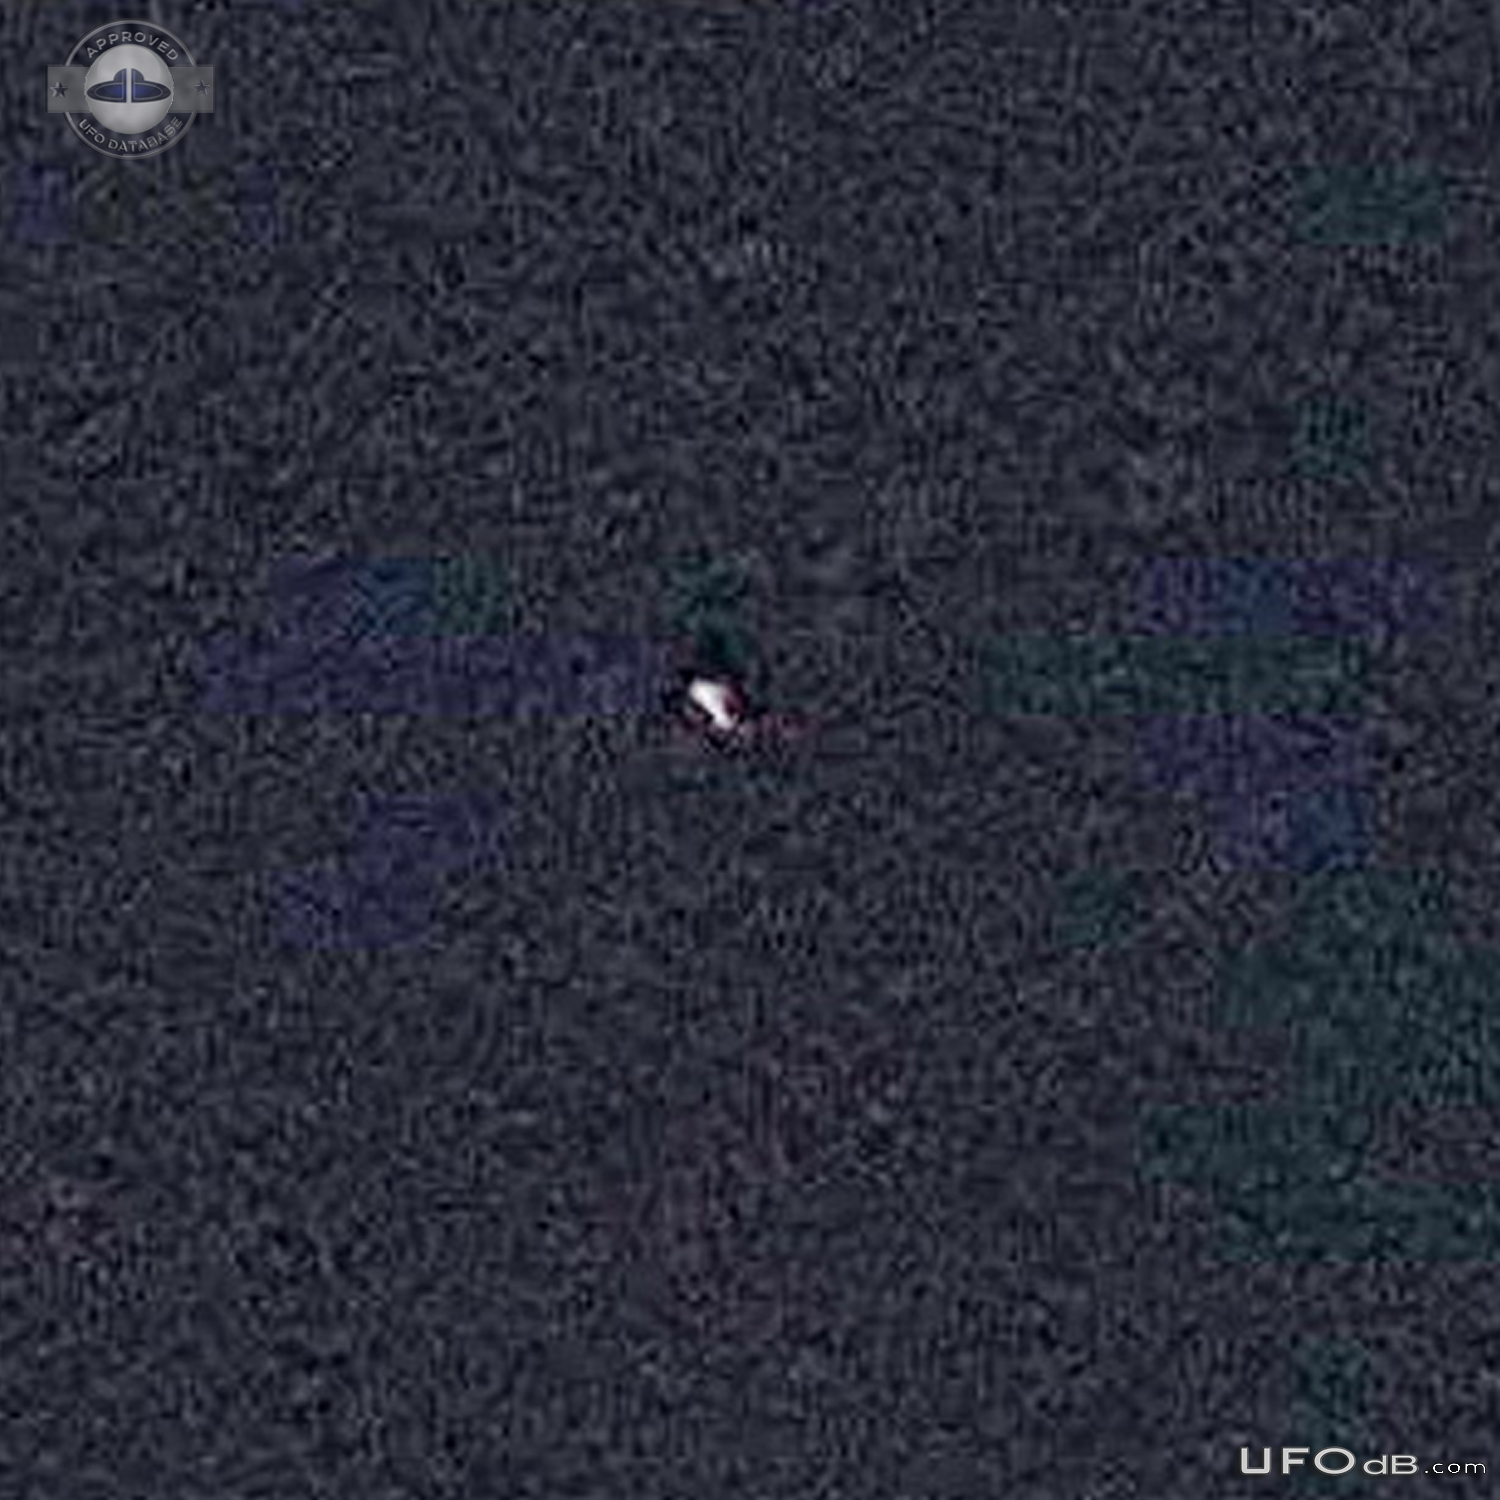 Bright UFO moved fast - like a star but moved - Tucson Arizona USA 201 UFO Picture #798-2